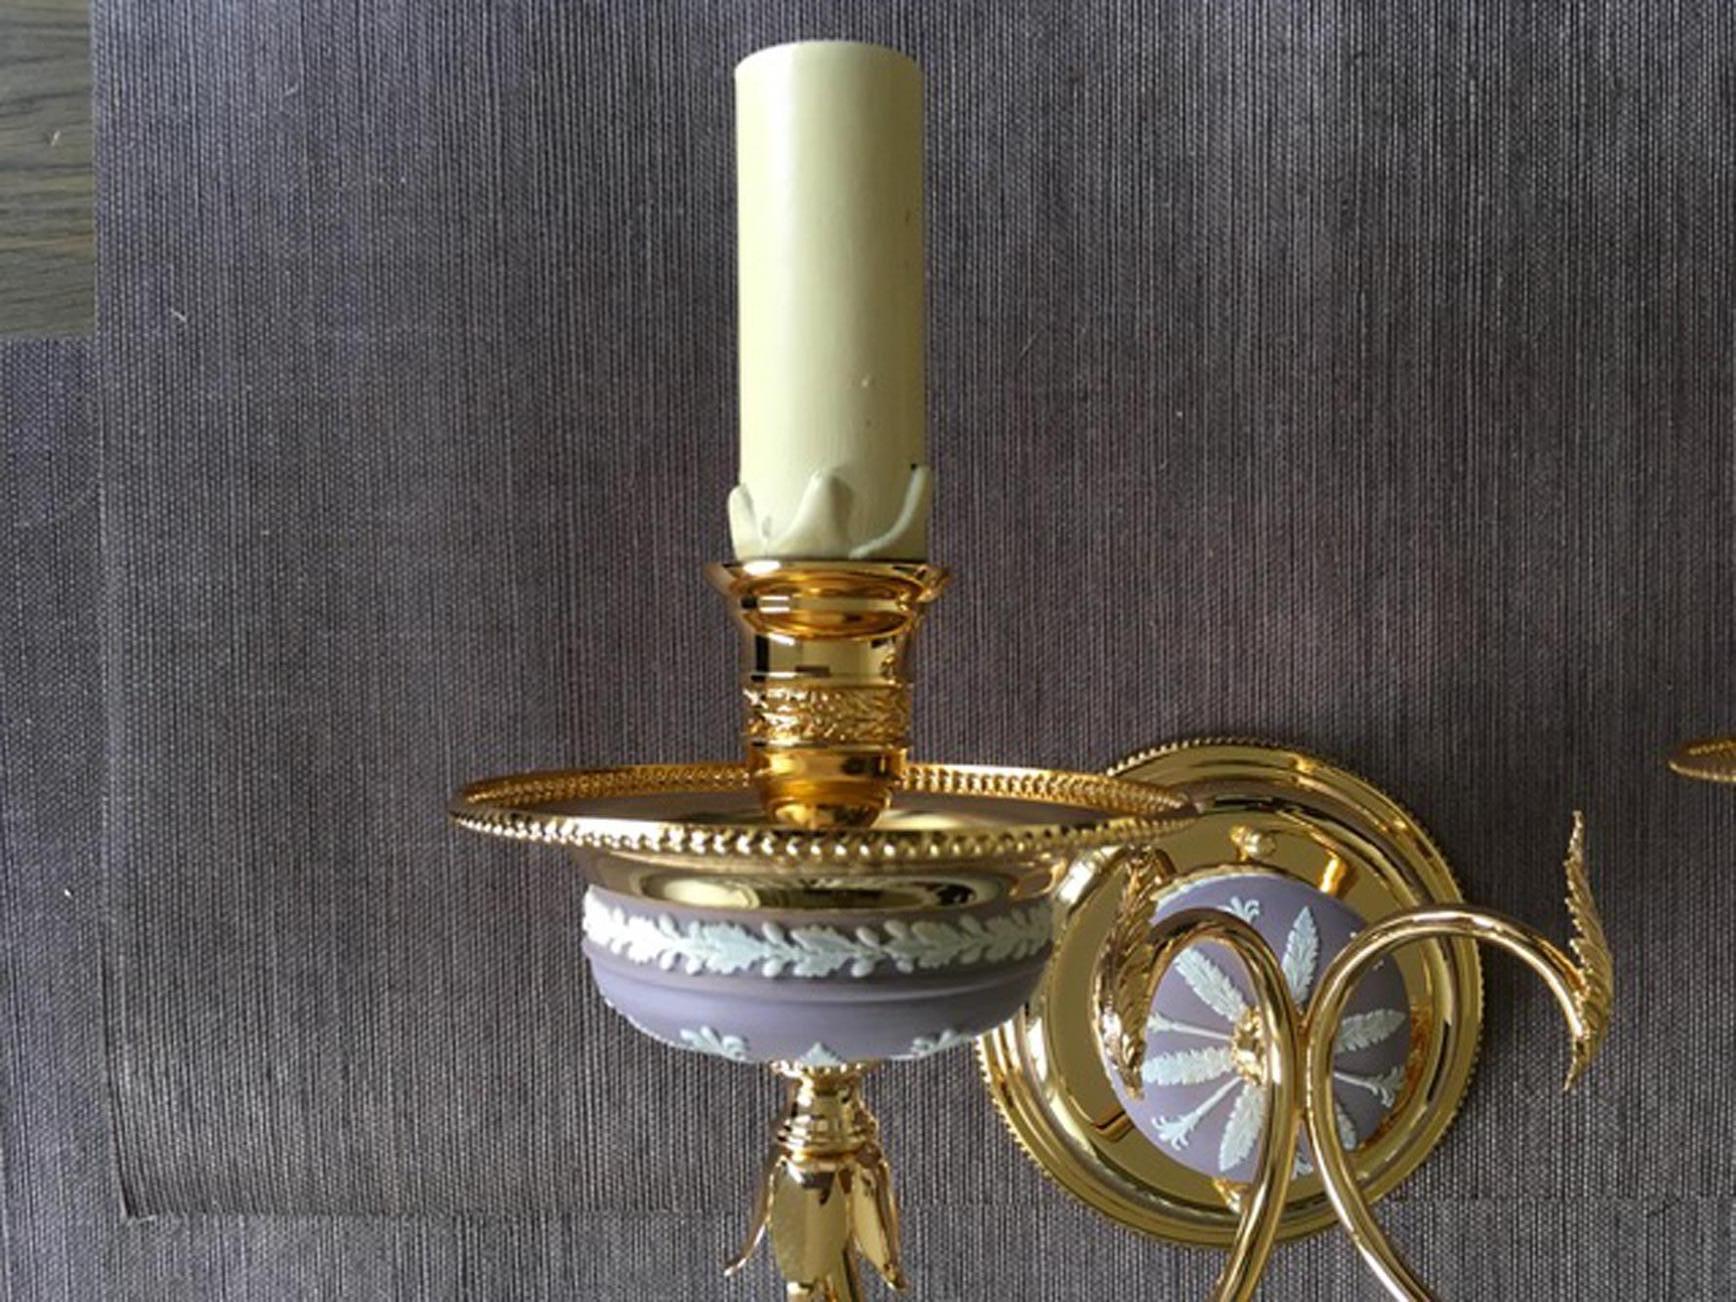 Italy 1970 Post-Modern Brass Porcelain  Wall Lights For Sale 6